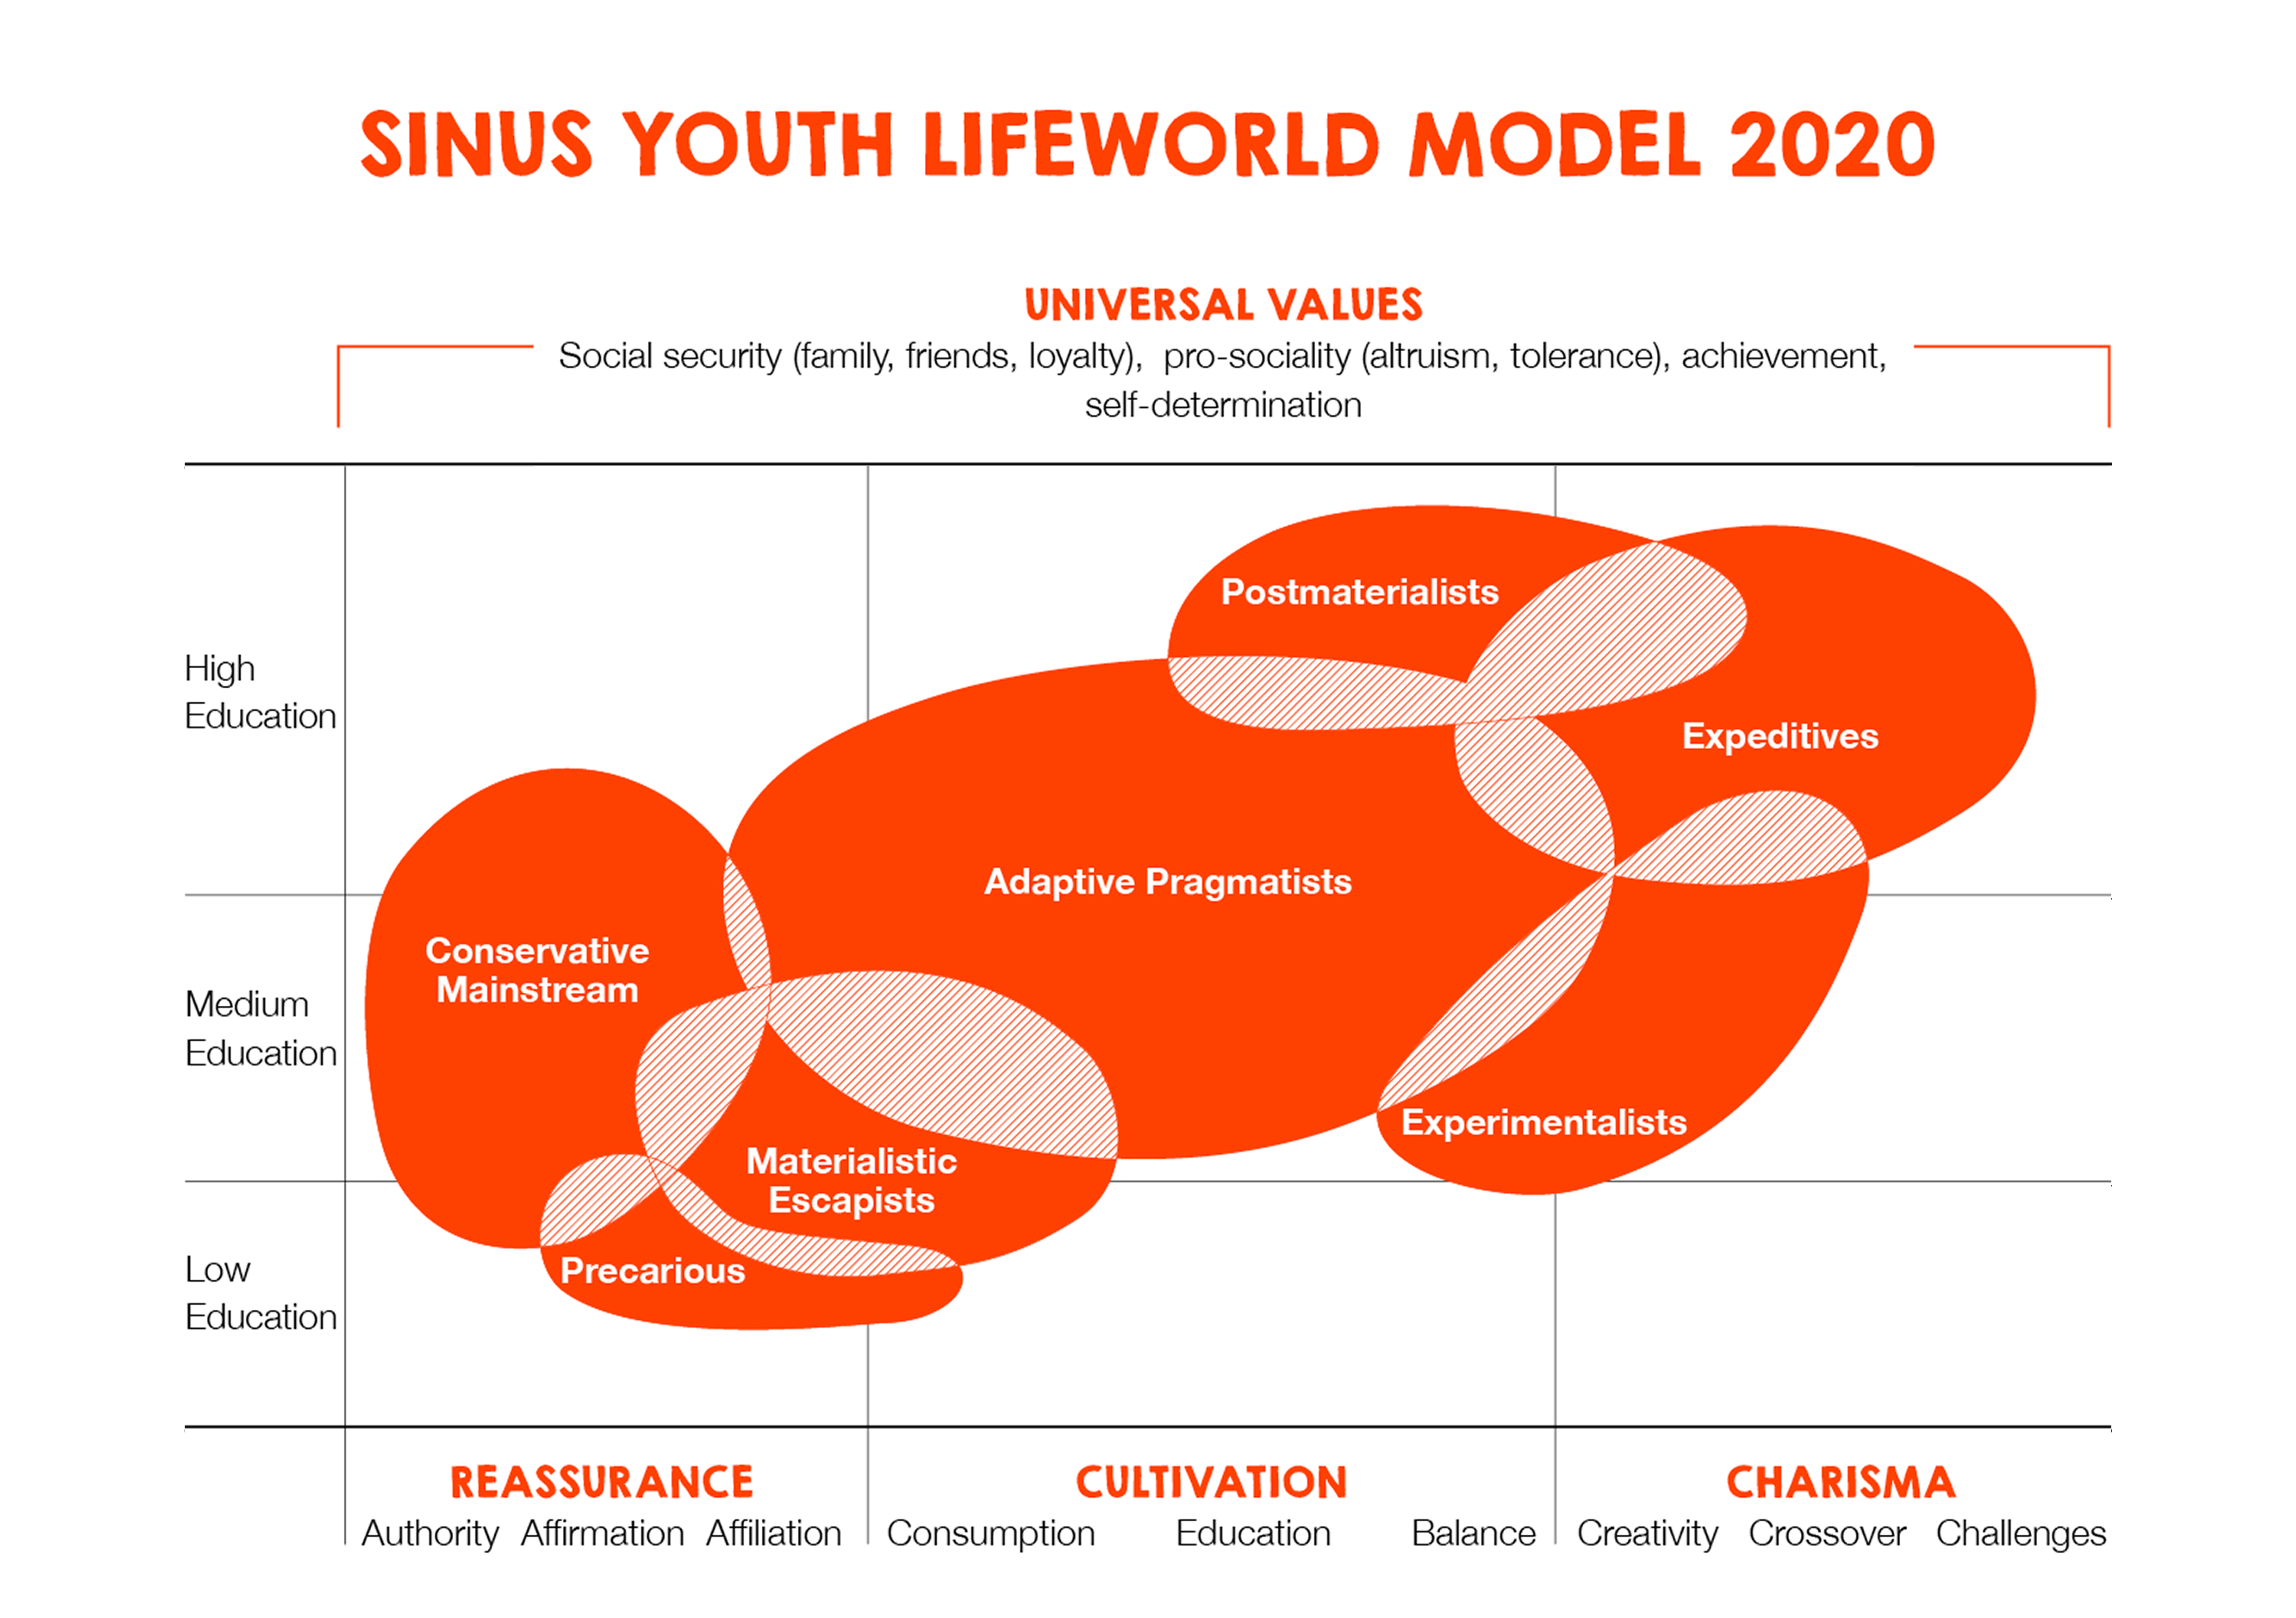 Sinus model for youth lifeworlds: Conservative Mainstream, Adaptive Pragmatists, Precarious, Materialistic Escapists, Experimentalists, Postmaterialists, Expeditives (see notes)